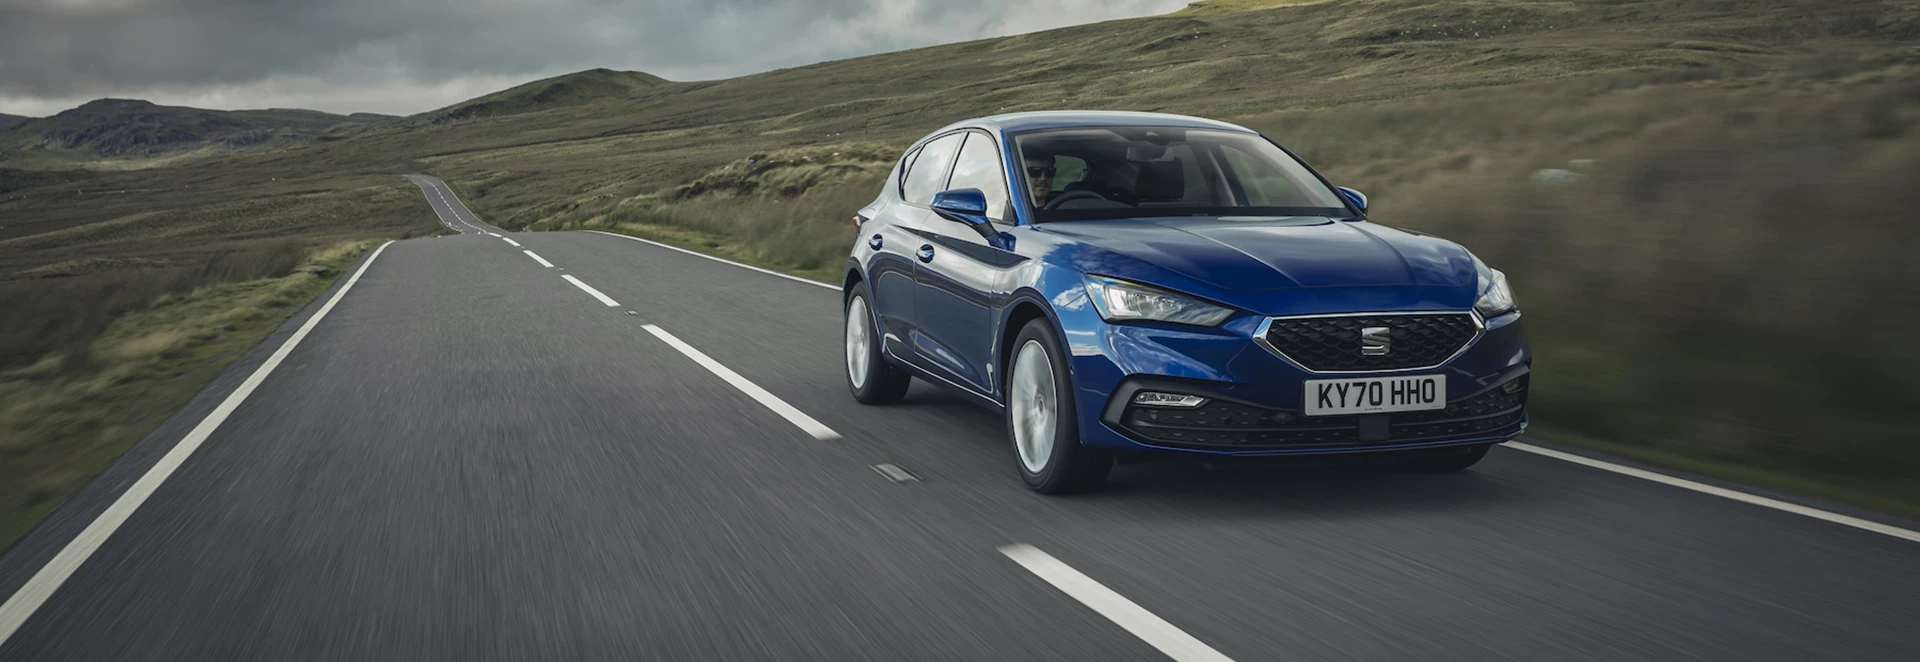 Buyer's guide to the Seat Leon 